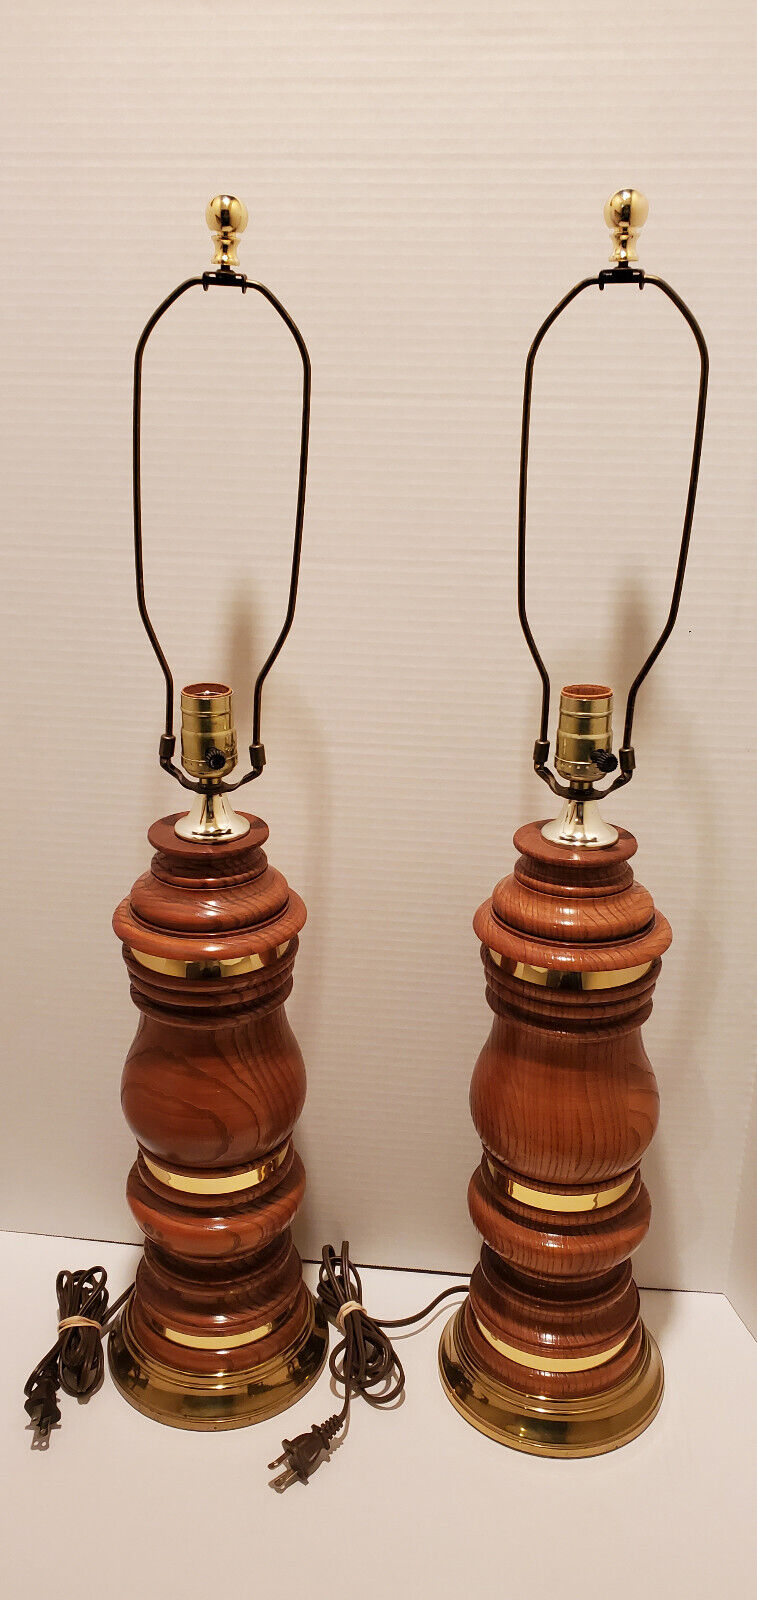 Set of 2, Mid-centry Vintage Wooden W/Brass Accent Collars, Large Table Lamps